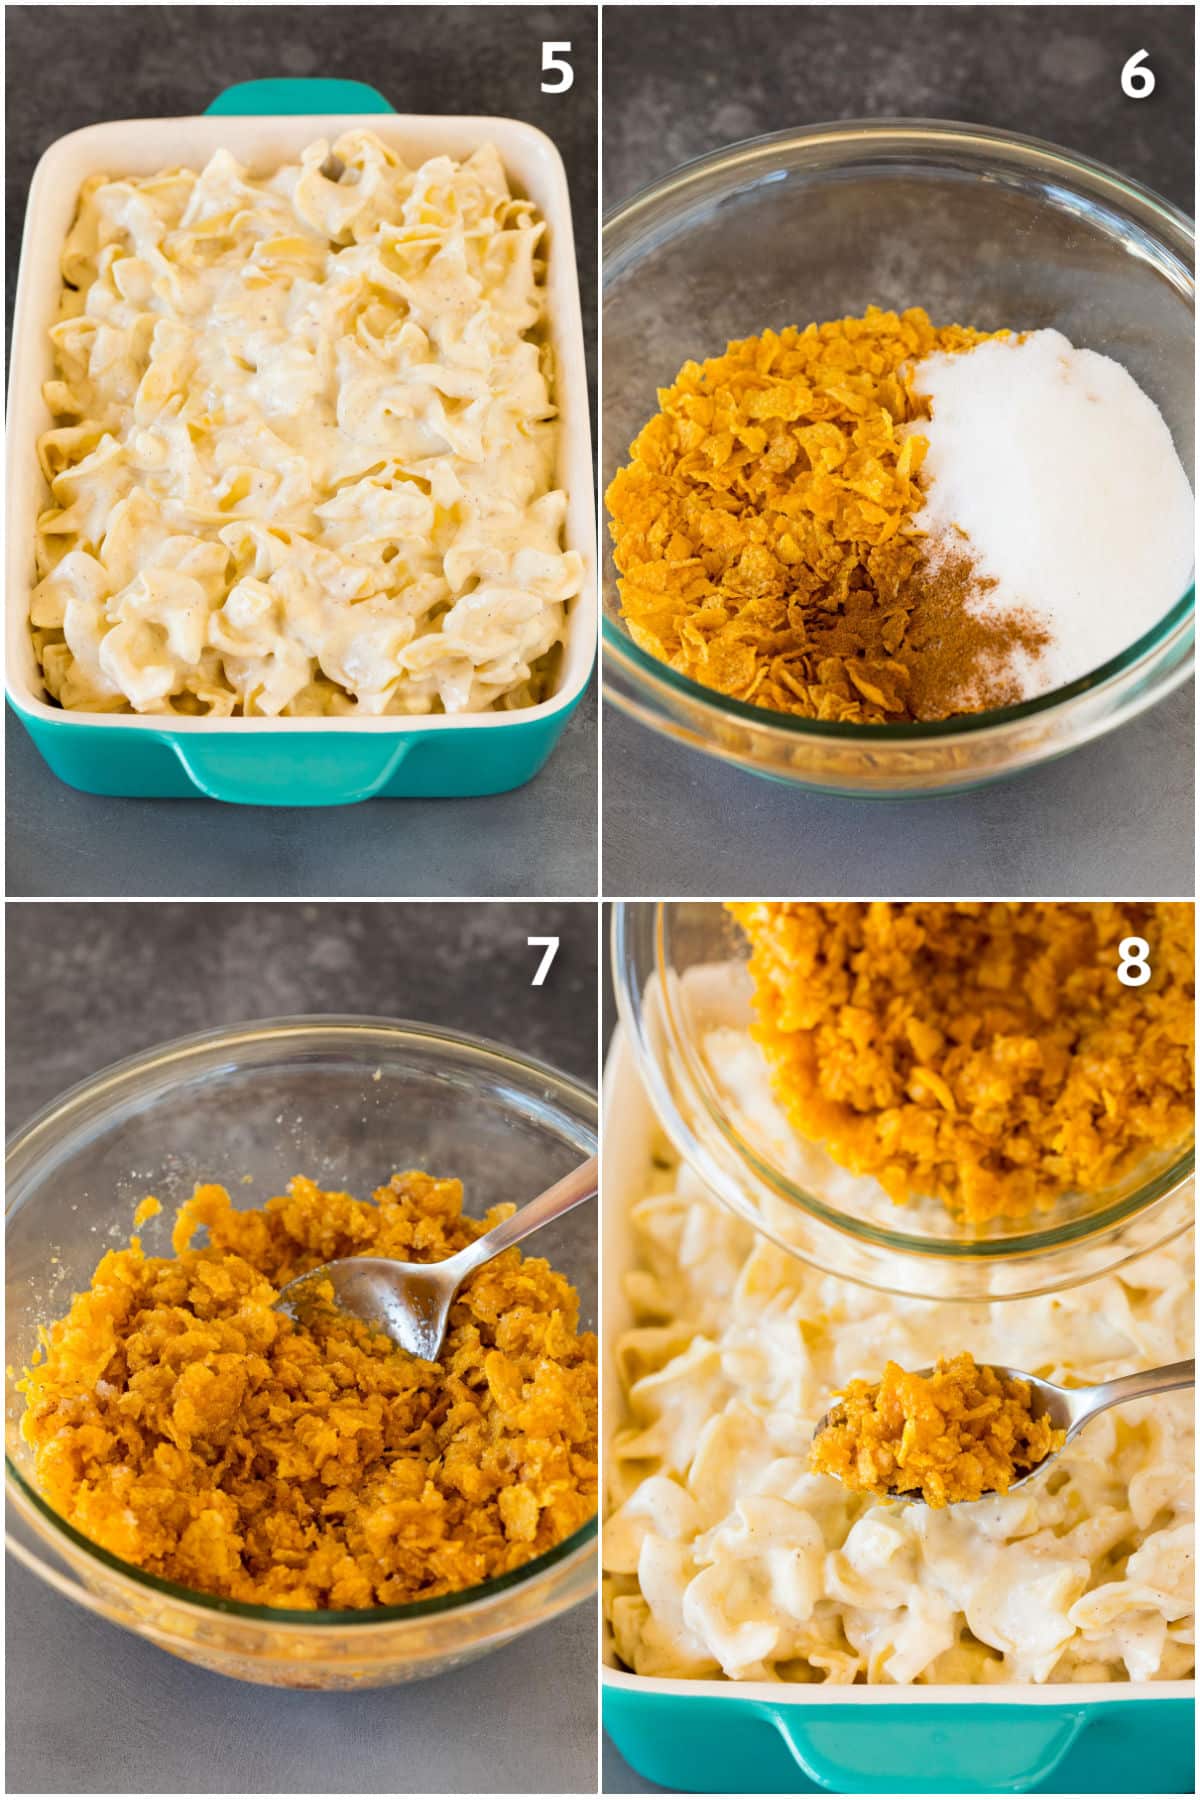 Step by step photos showing how to assemble noodle kugel.